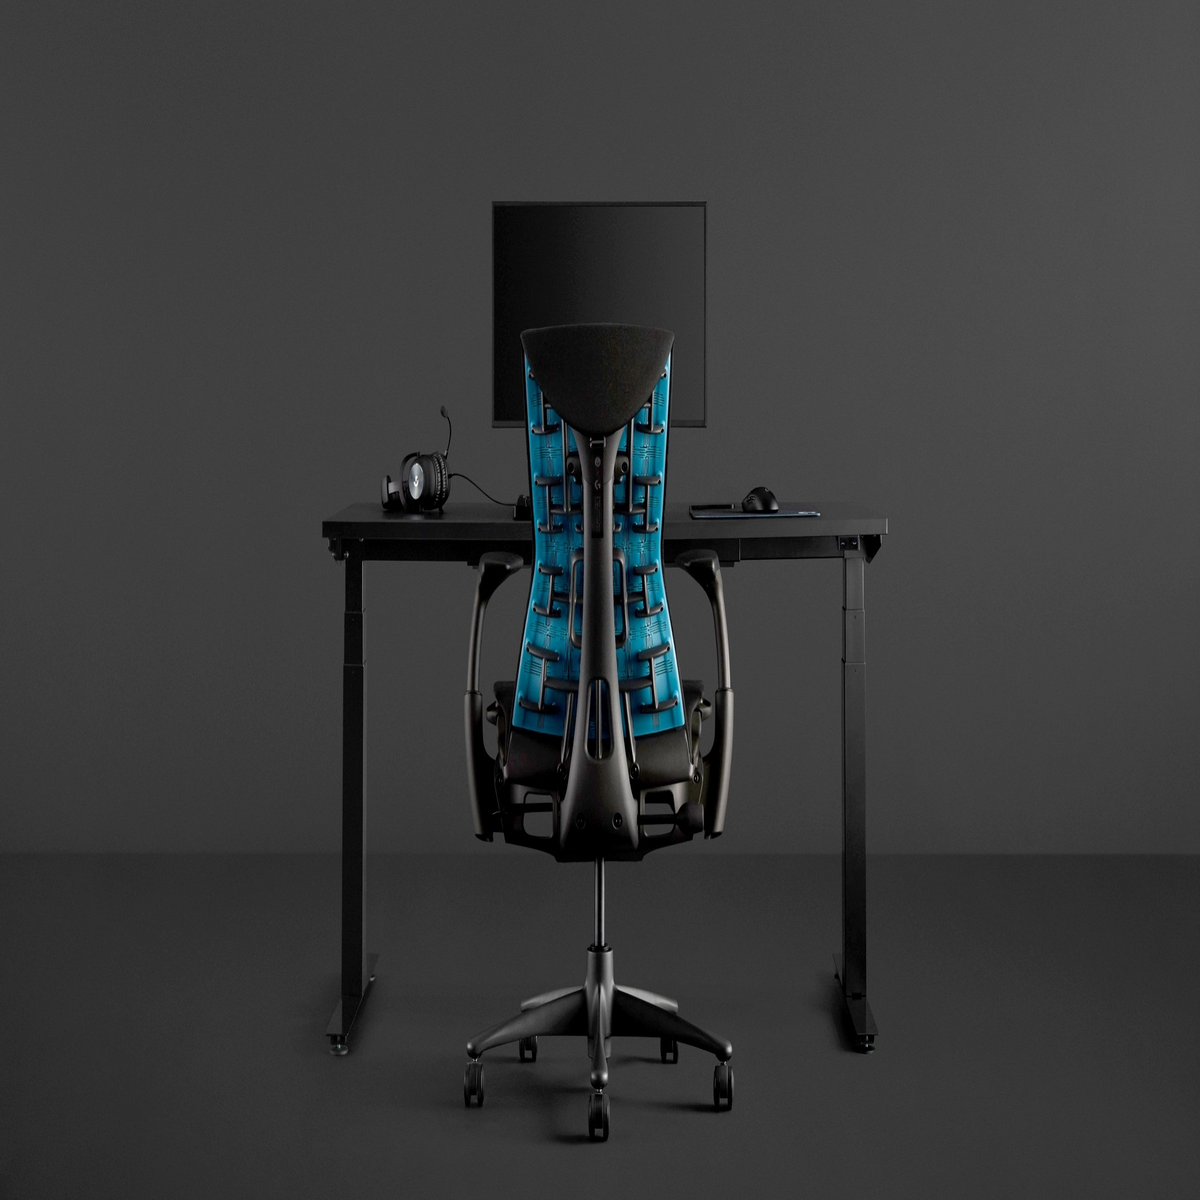 https://assetsio.reedpopcdn.com/herman-miller-x-logitech-g-embody-gaming-chair-review-1611226831531.jpg?width=1200&height=1200&fit=crop&quality=100&format=png&enable=upscale&auto=webp